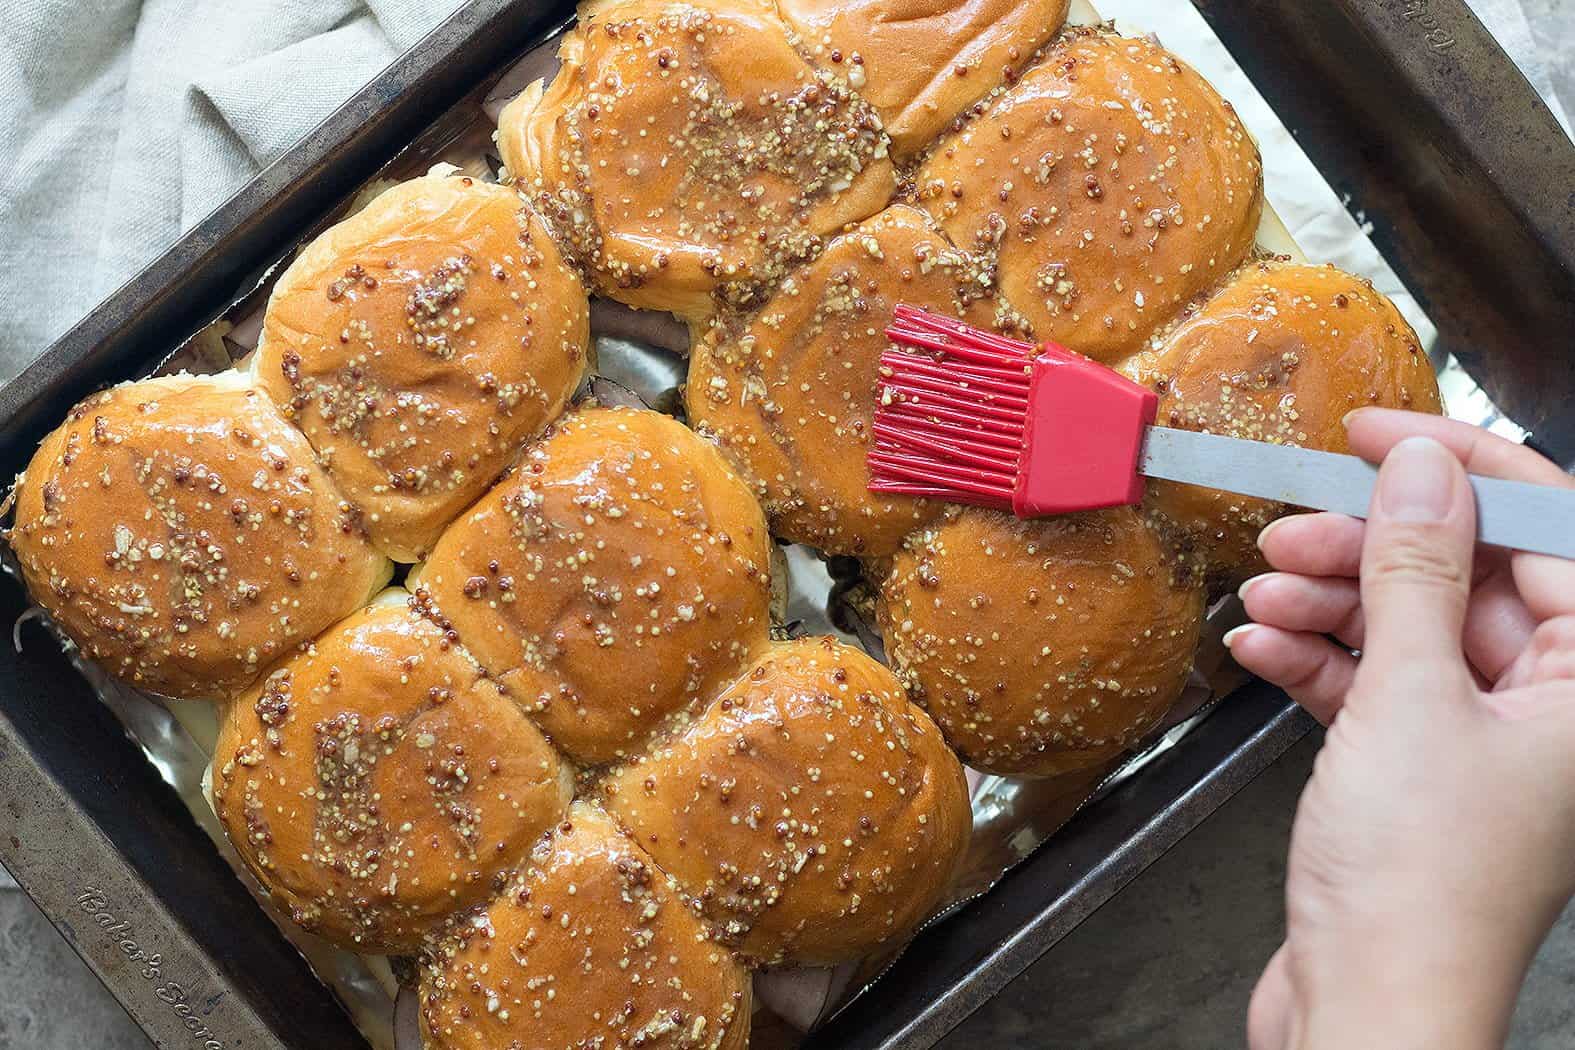 Brush the melted butter spread on the Hawaiian rolls, cover with aluminum foil and bake in the oven. Bake uncovered for some minutes, cut and serve immediately. 